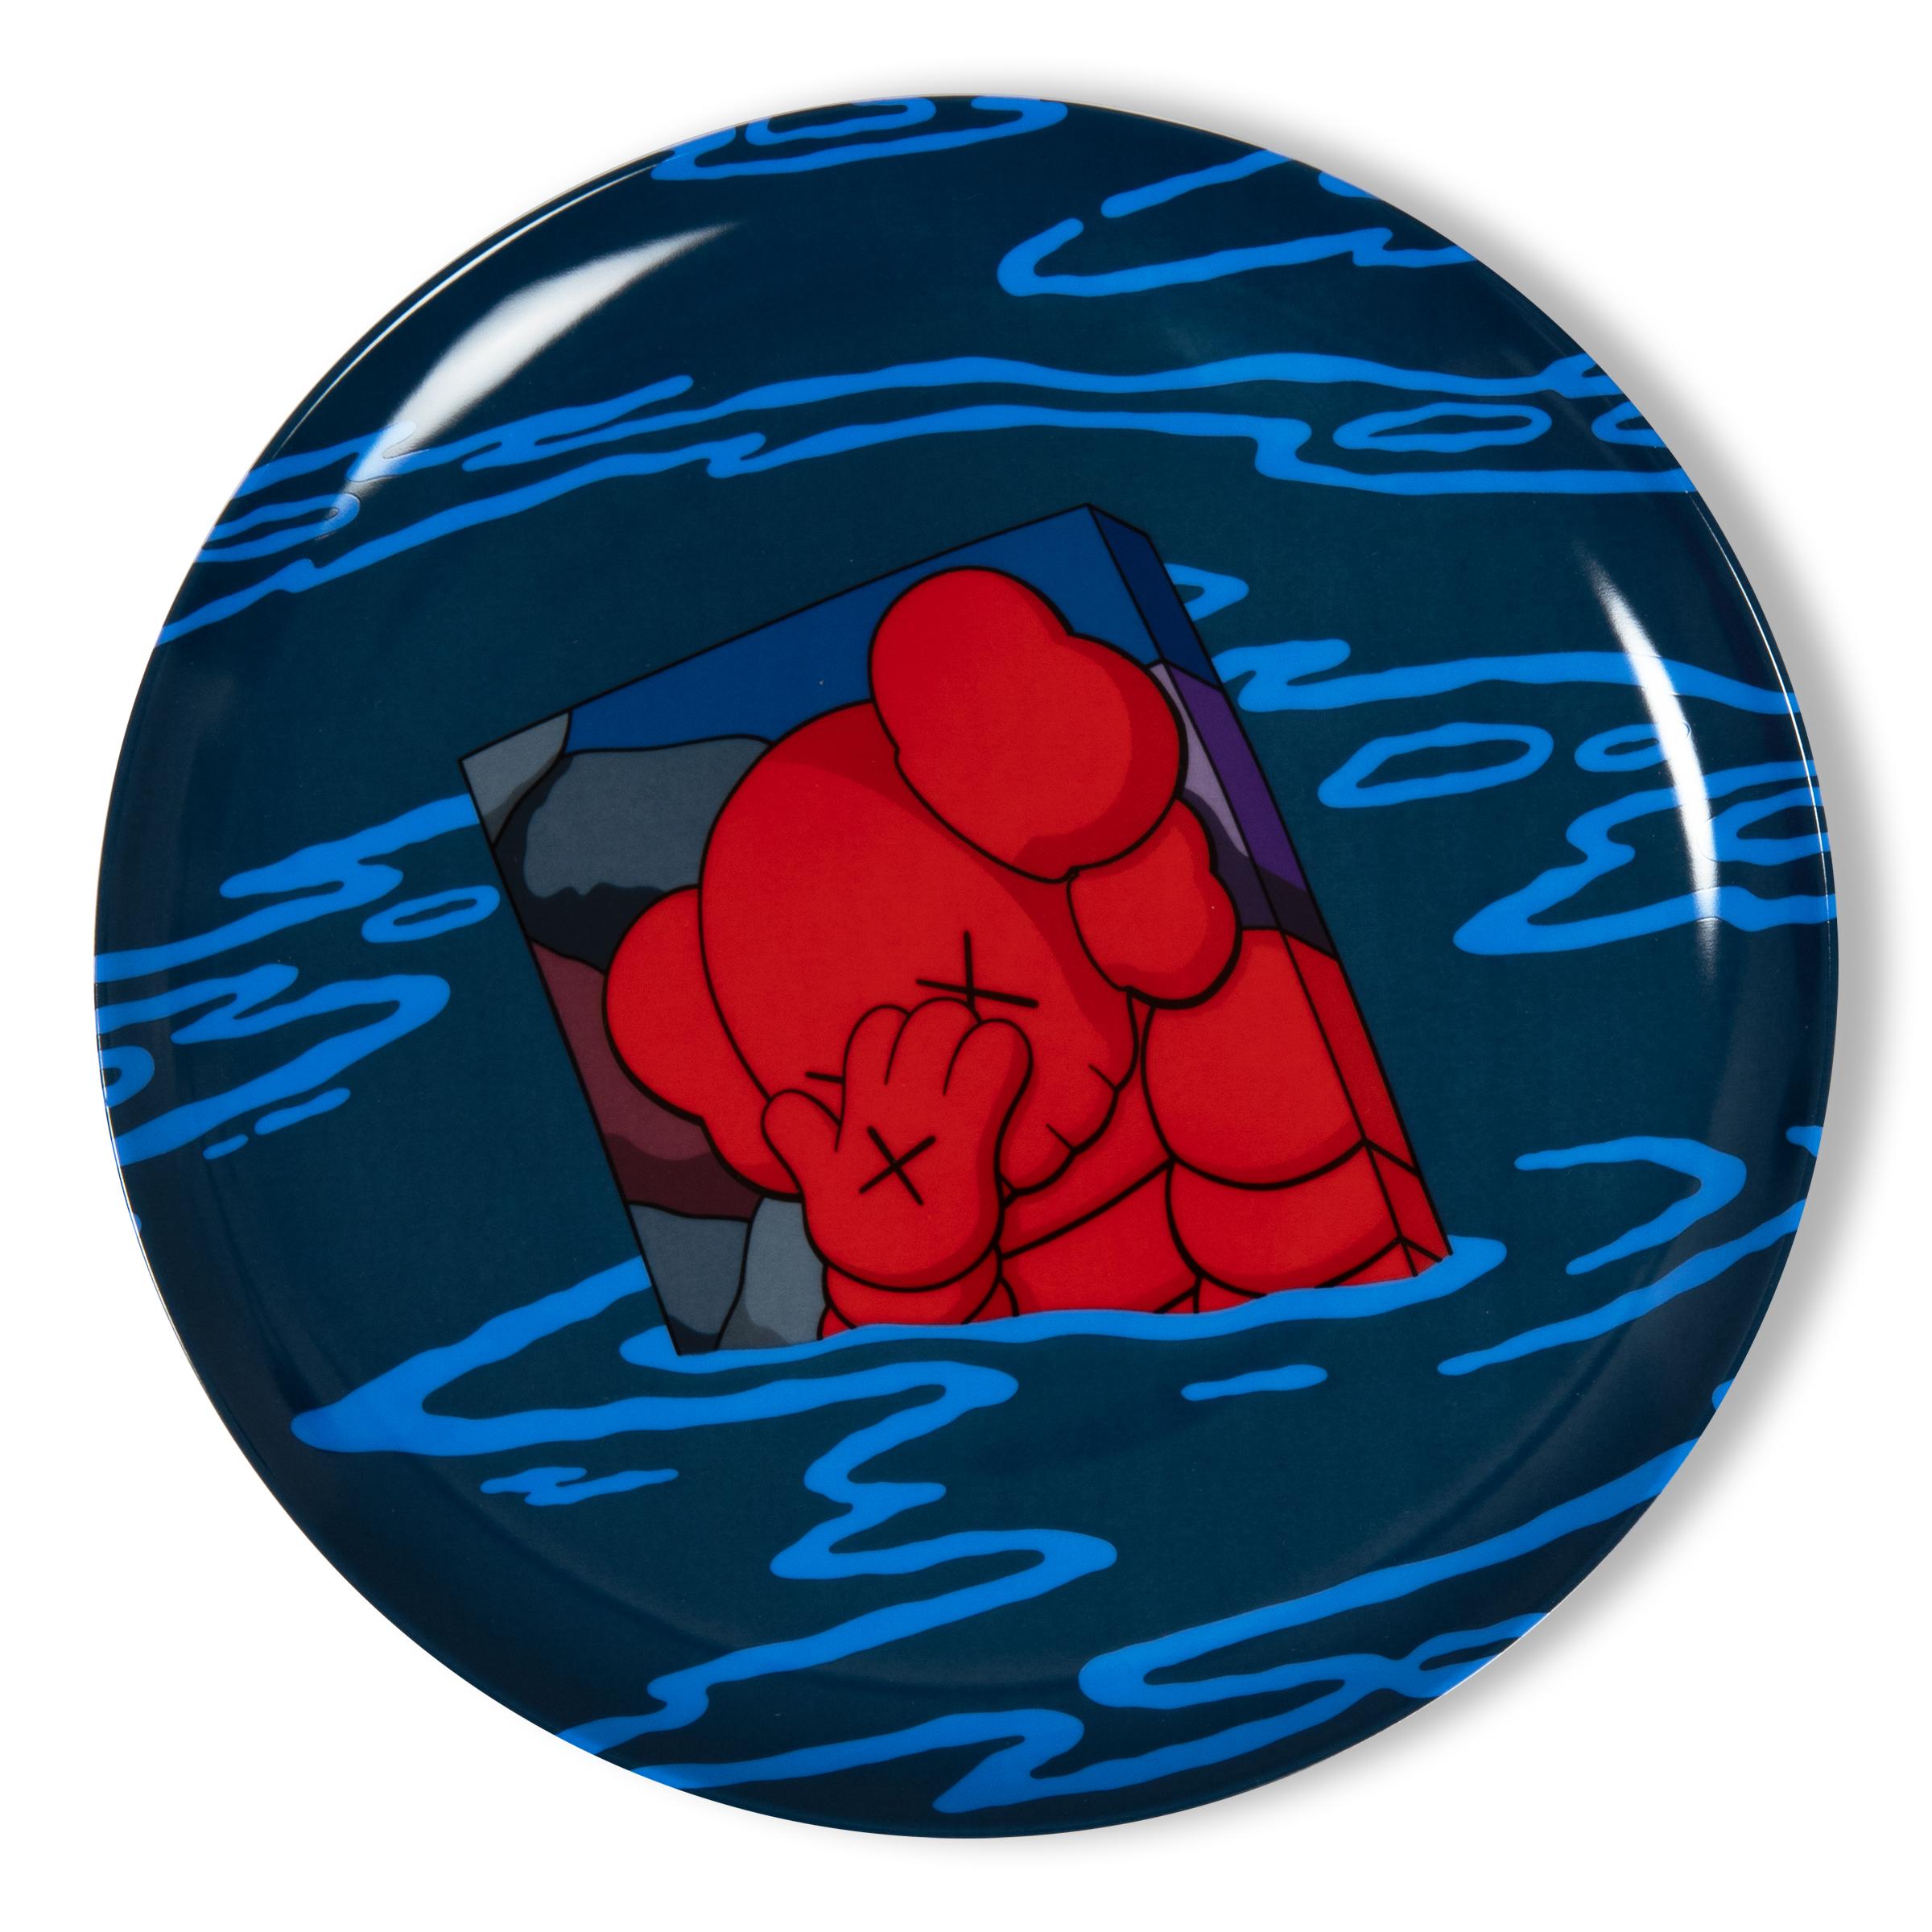 KAWS (American, b. 1974)
Hours, Nights, Weeks, Months, 2023
Medium: Porcelain plate (fine bone china)
Dimensions: 10 1/2 in diameter  26.7 cm diameter
Edition of 250: Printed signature and edition details on verso
Condition: Mint (in original